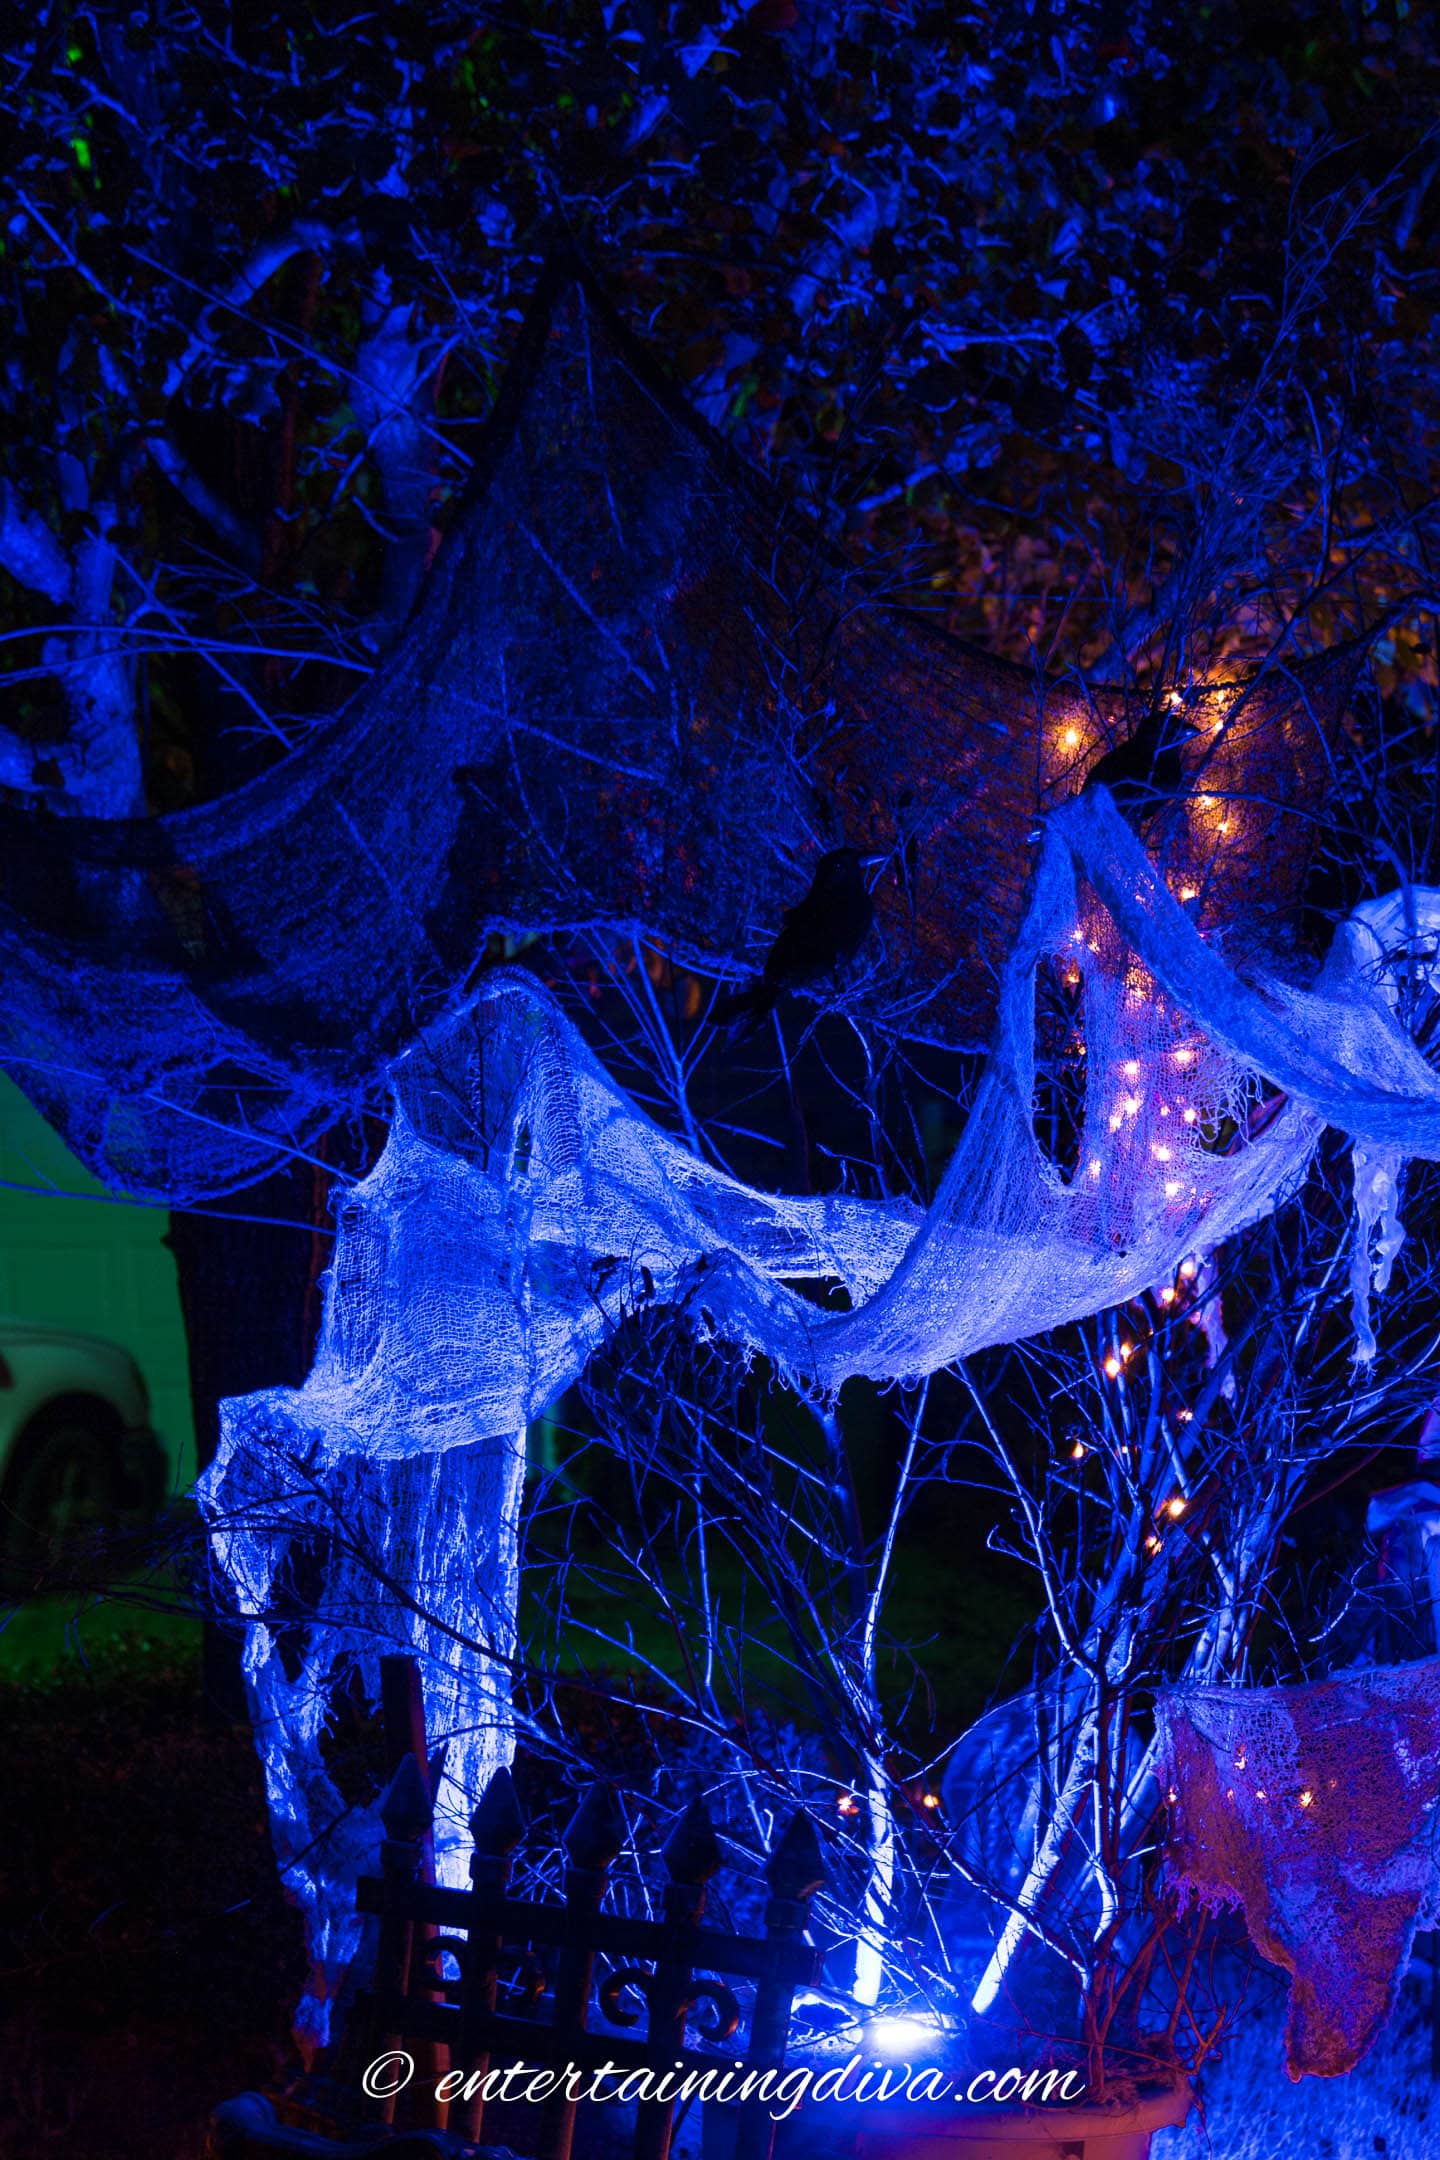 A tree is lit up with blue lights for Halloween outdoor lighting.